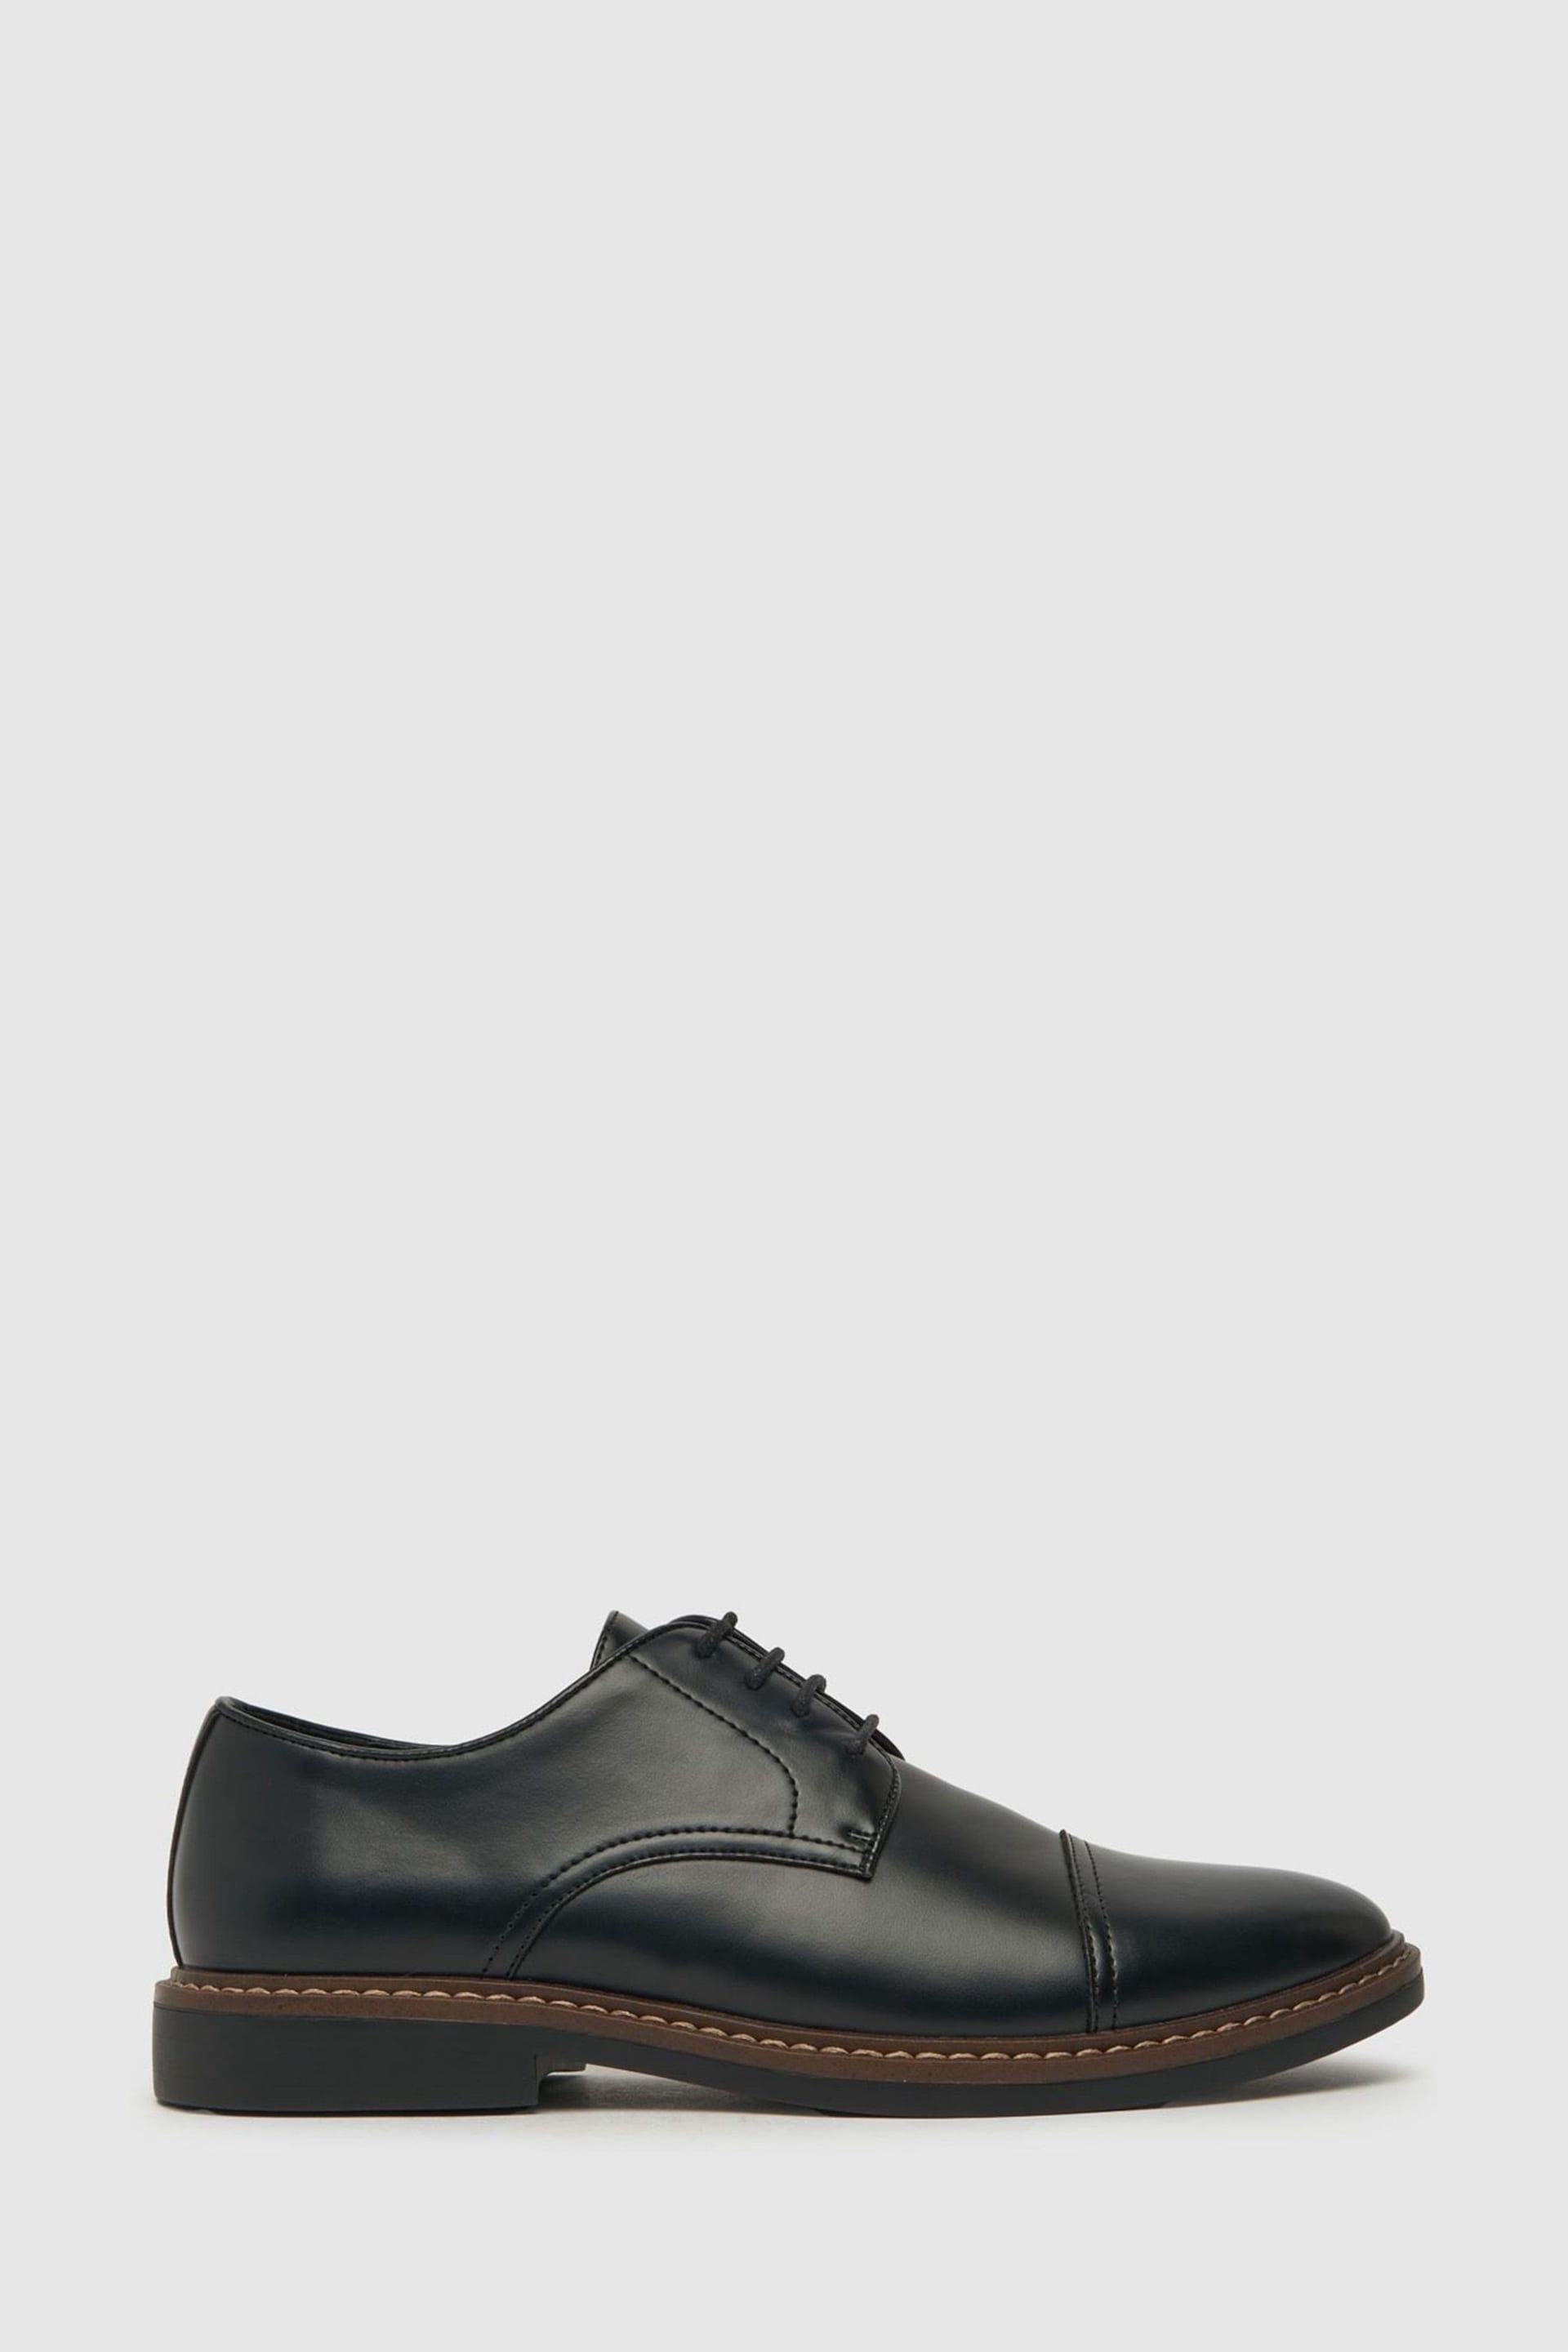 Schuh Raymond Toe Lace-Up Shoes - Image 1 of 4